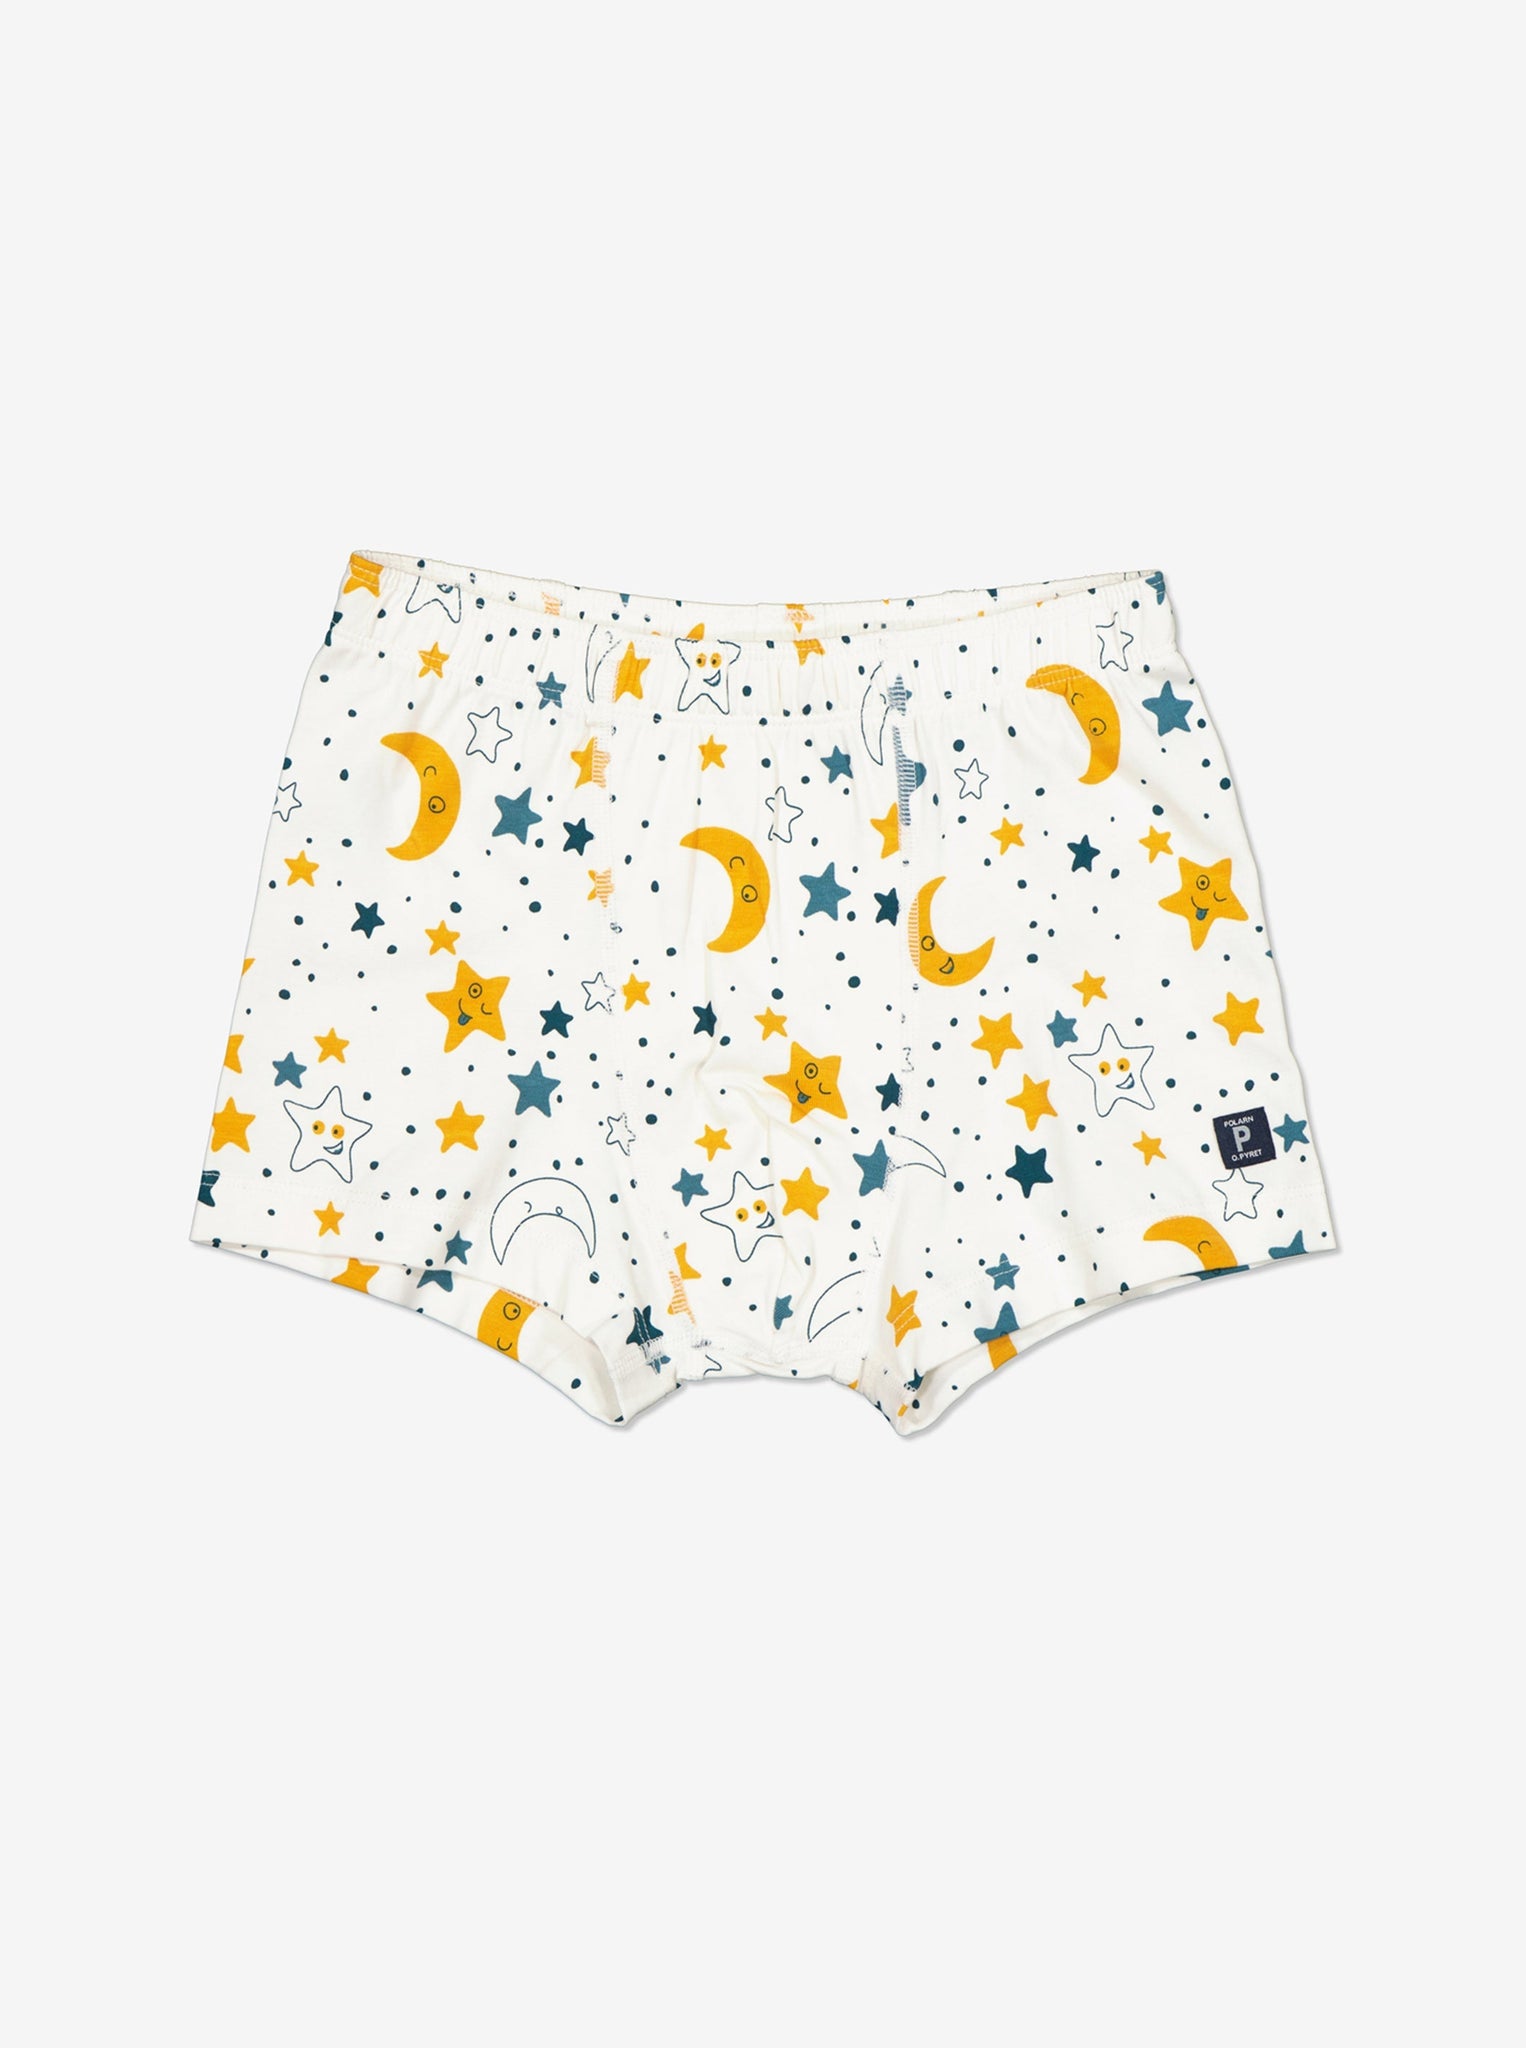 Organic Cotton Boys Boxers from the Polarn O. Pyret kidswear collection. The best ethical kids clothes